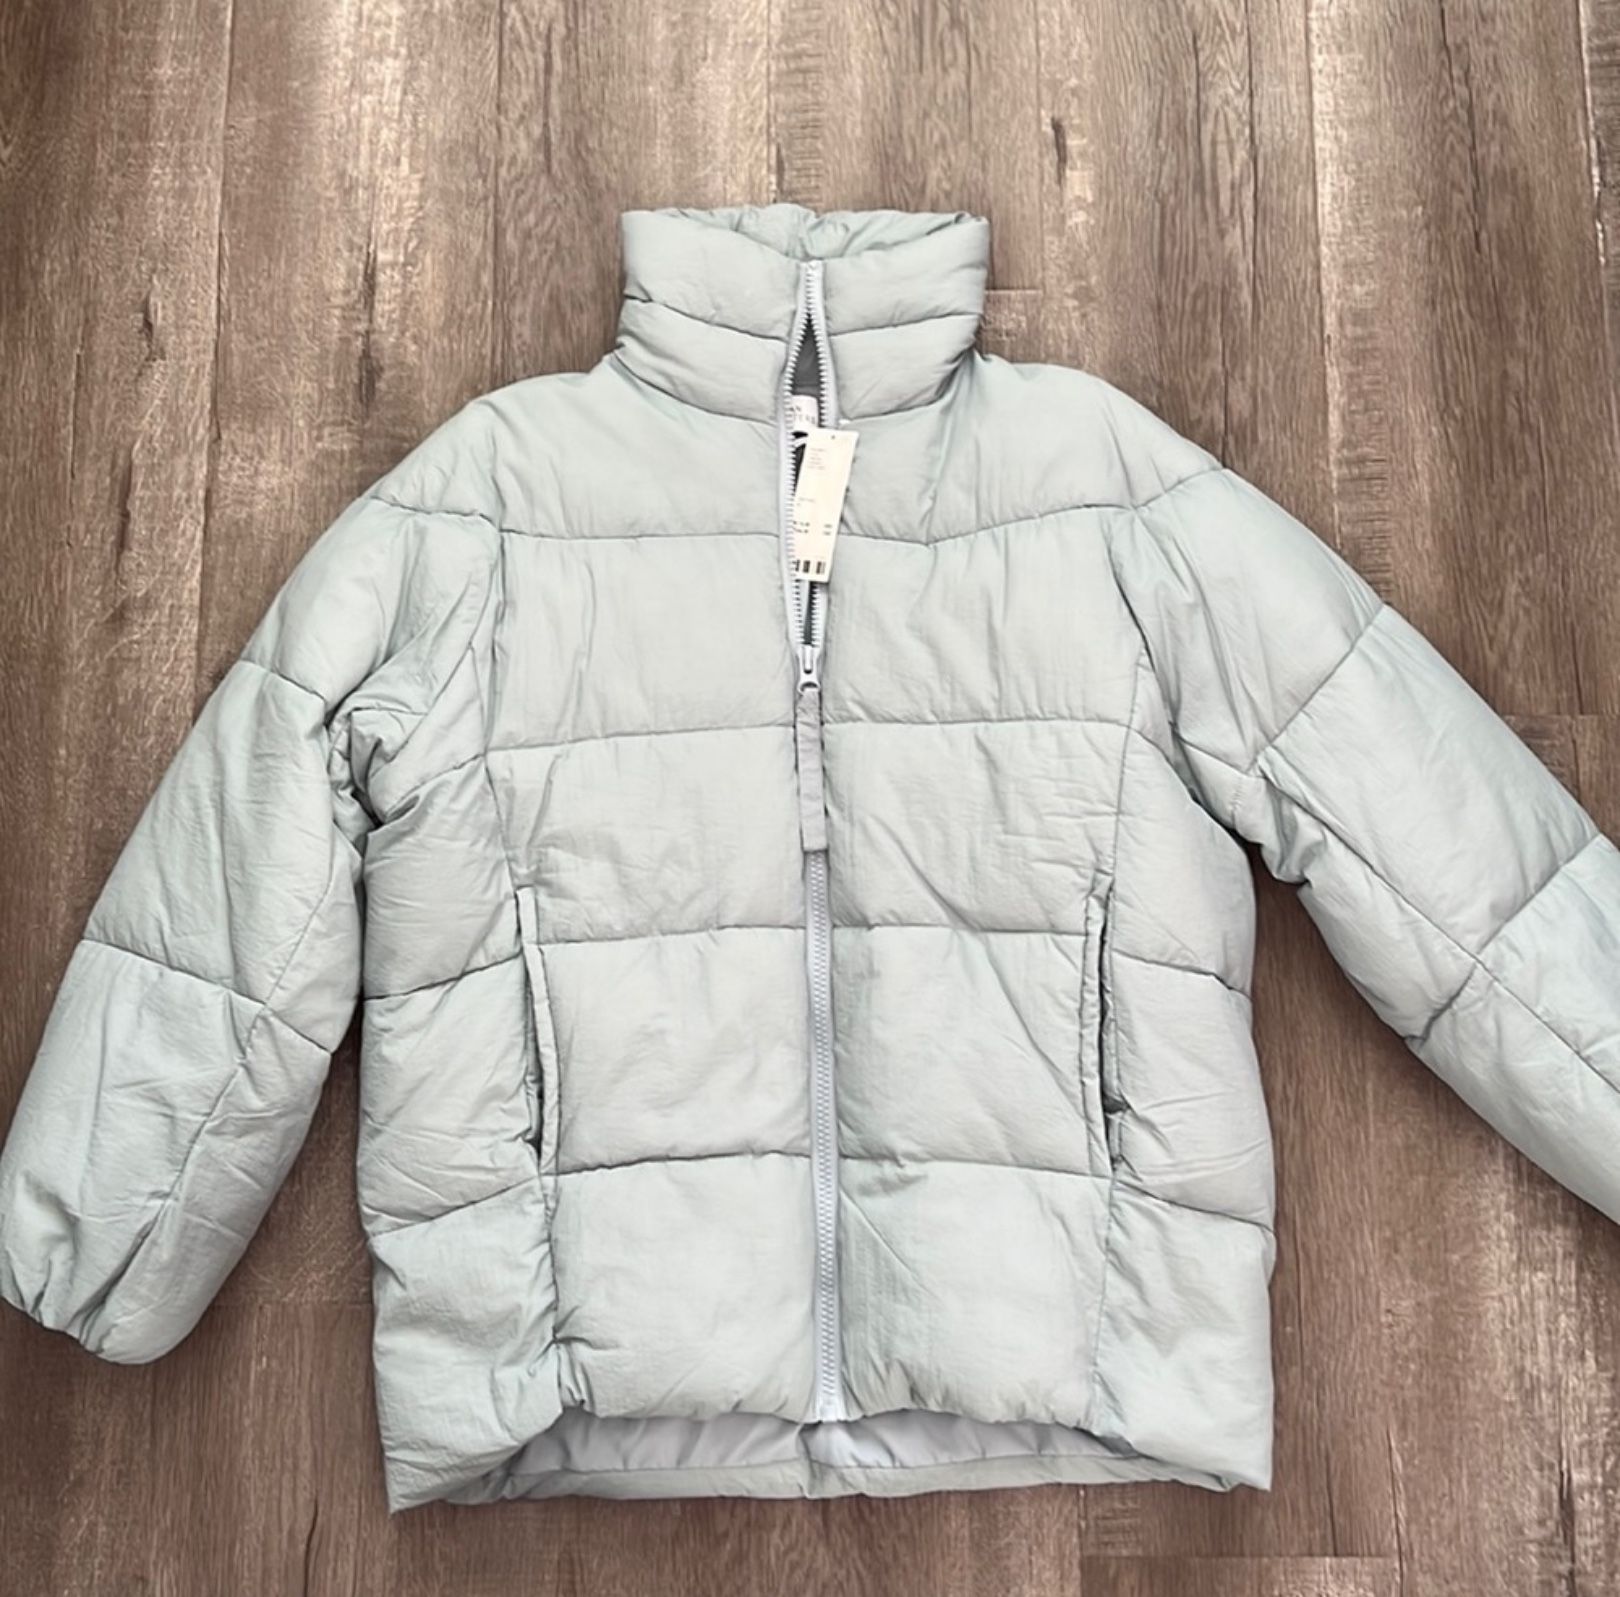 Urban Outfitters Puffer Jacket (small) -oversized 